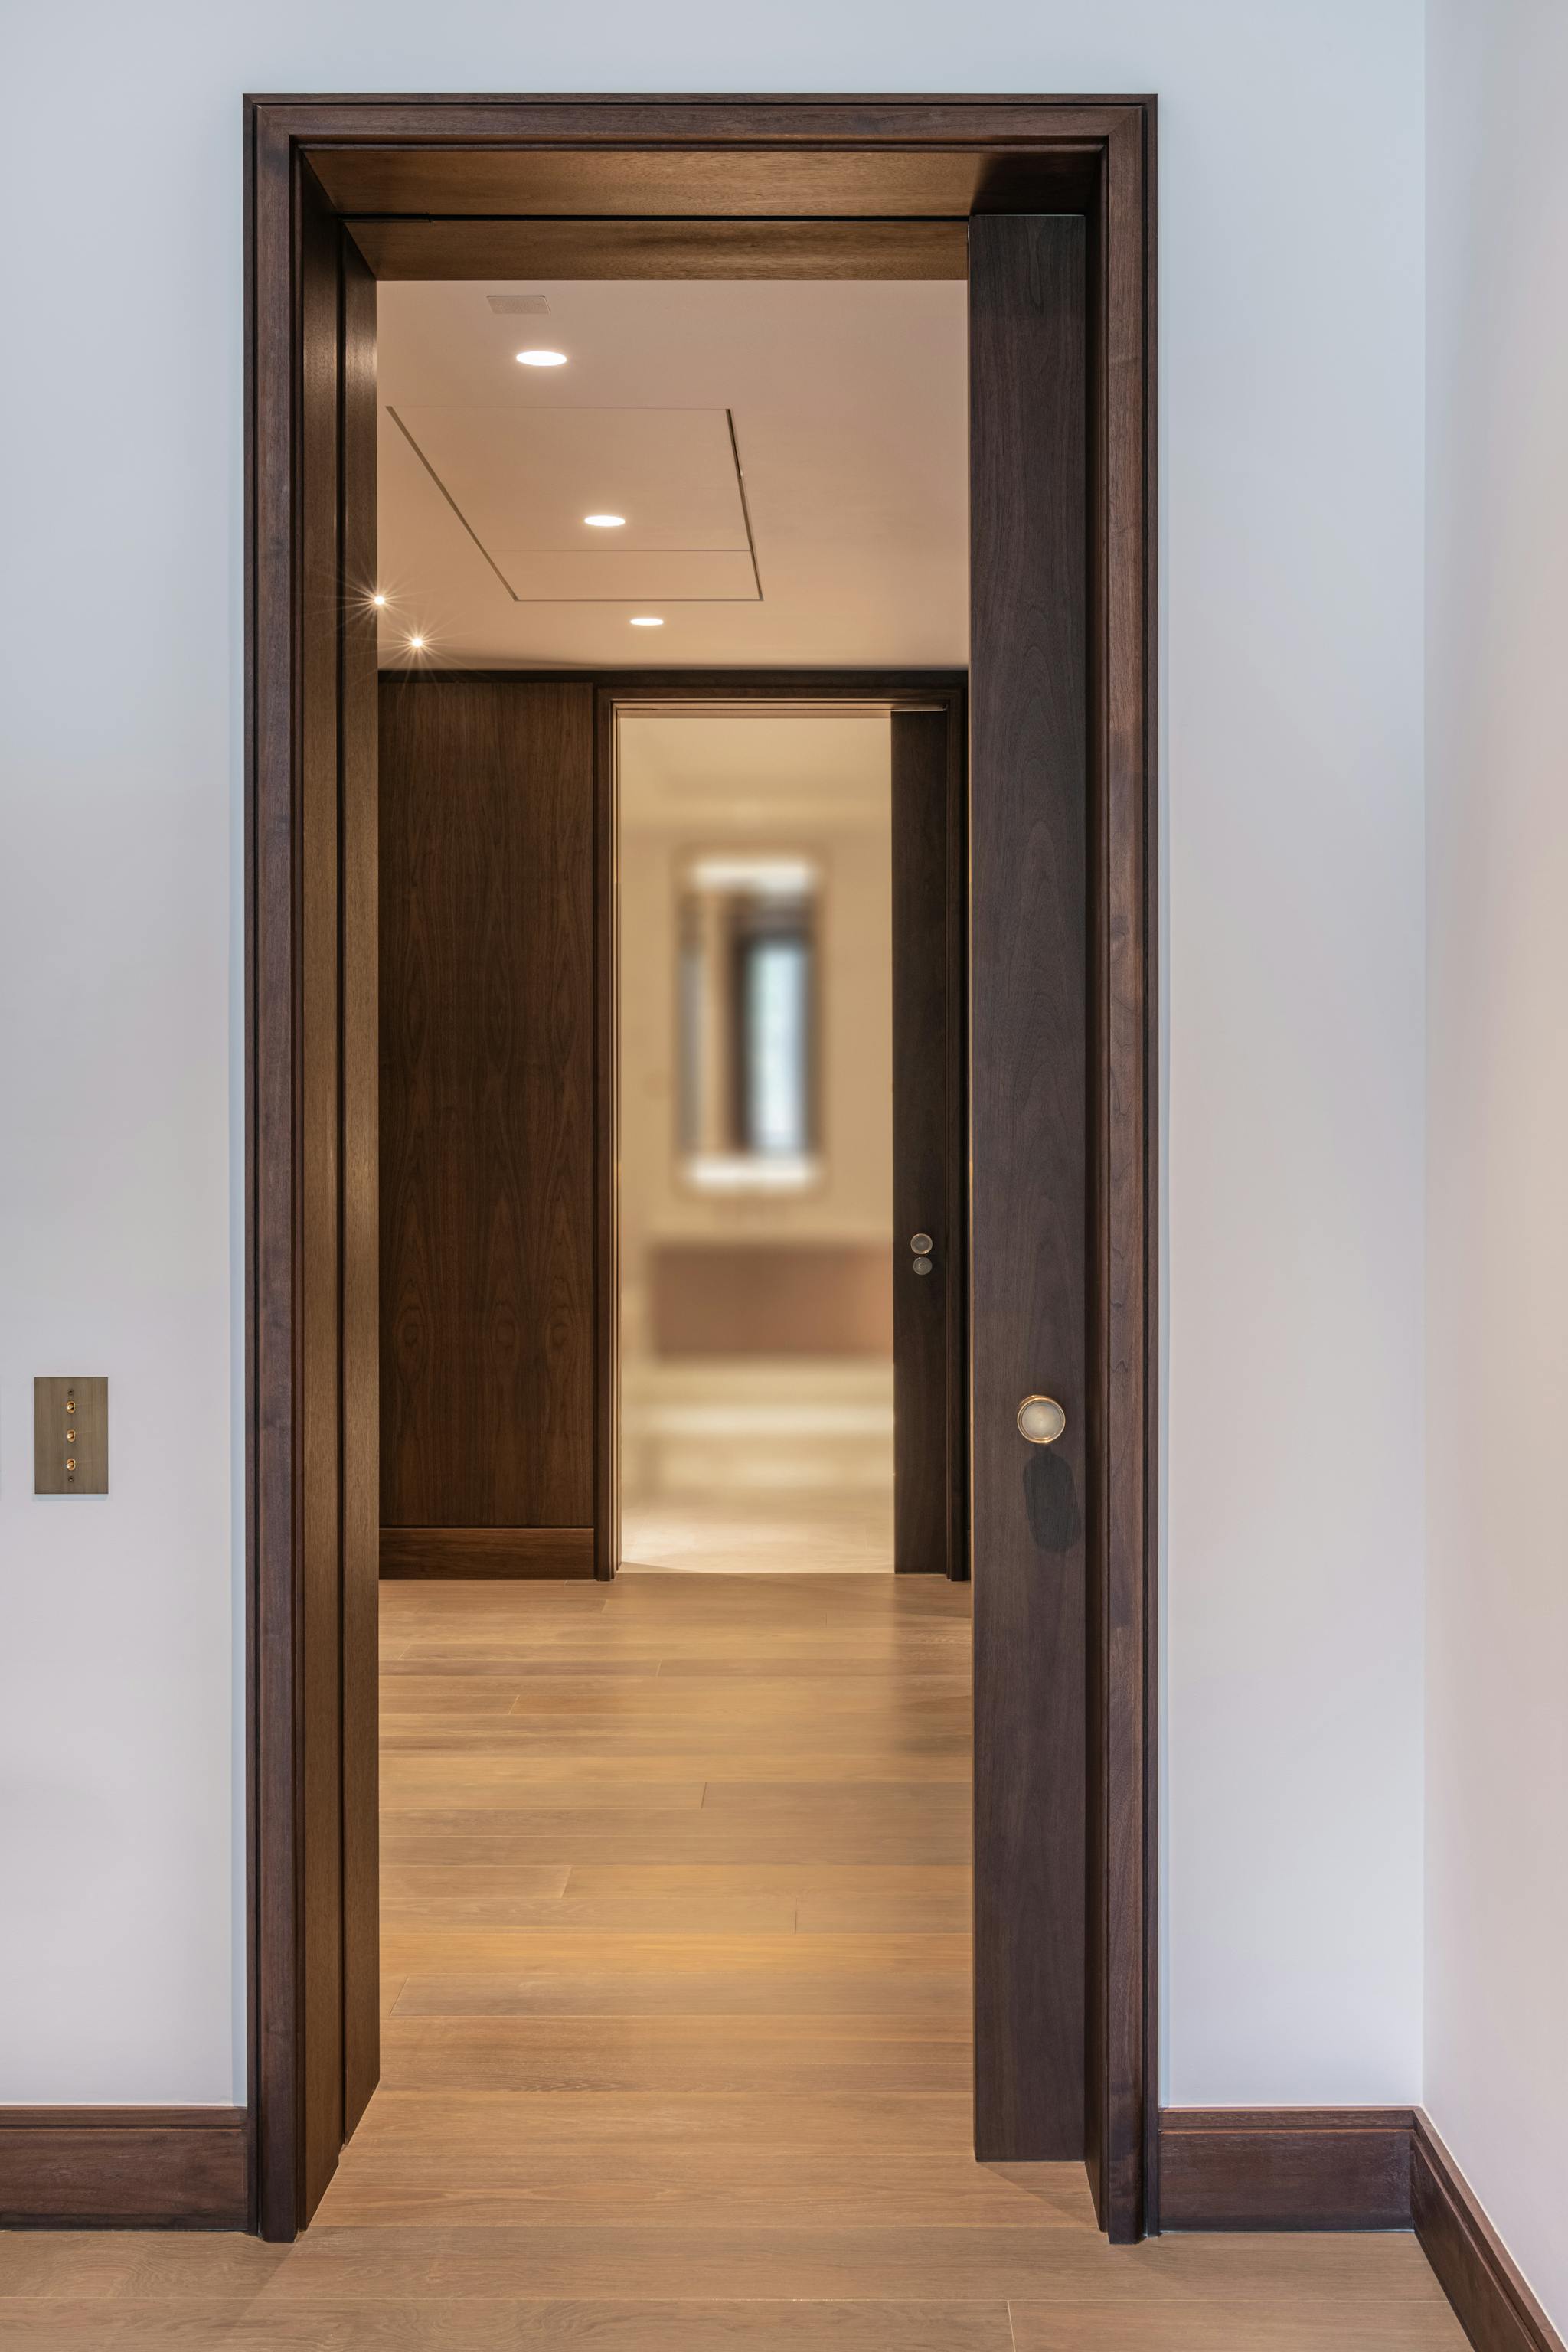 A luxury interior with wooden flooring and a dark heavy set wooden sliding pocket door leading to a hallway reception area